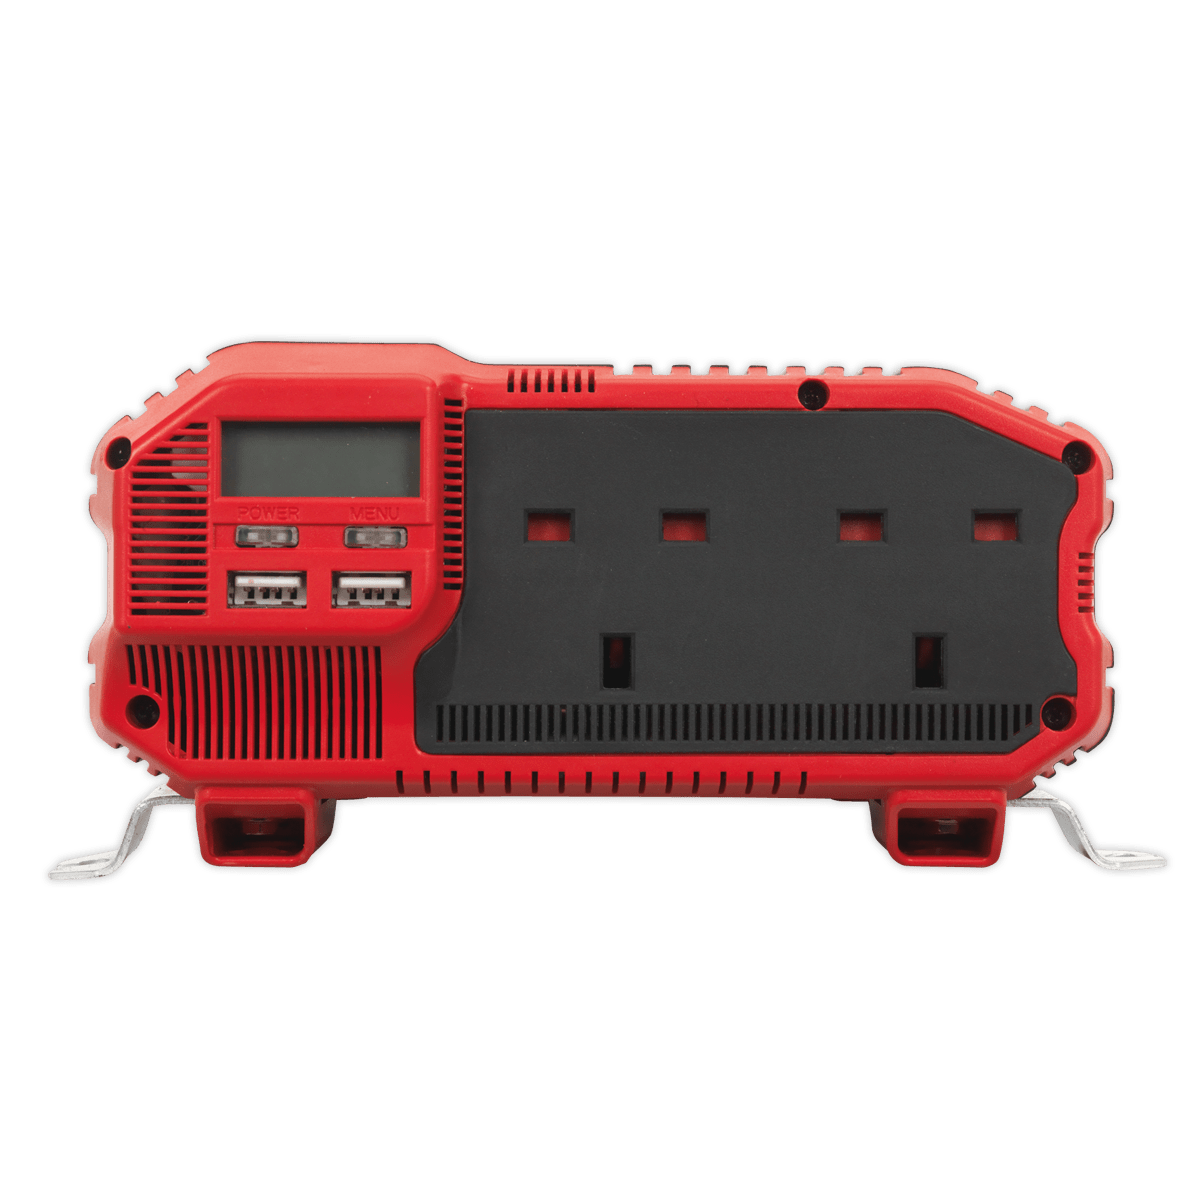 Power Inverter Modified Sine Wave 1100W 12V DC - 230V~50Hz | Supplies continuous smooth 230V power from 12V DC power supply found in cars, caravans, boats and commercials. | toolforce.ie